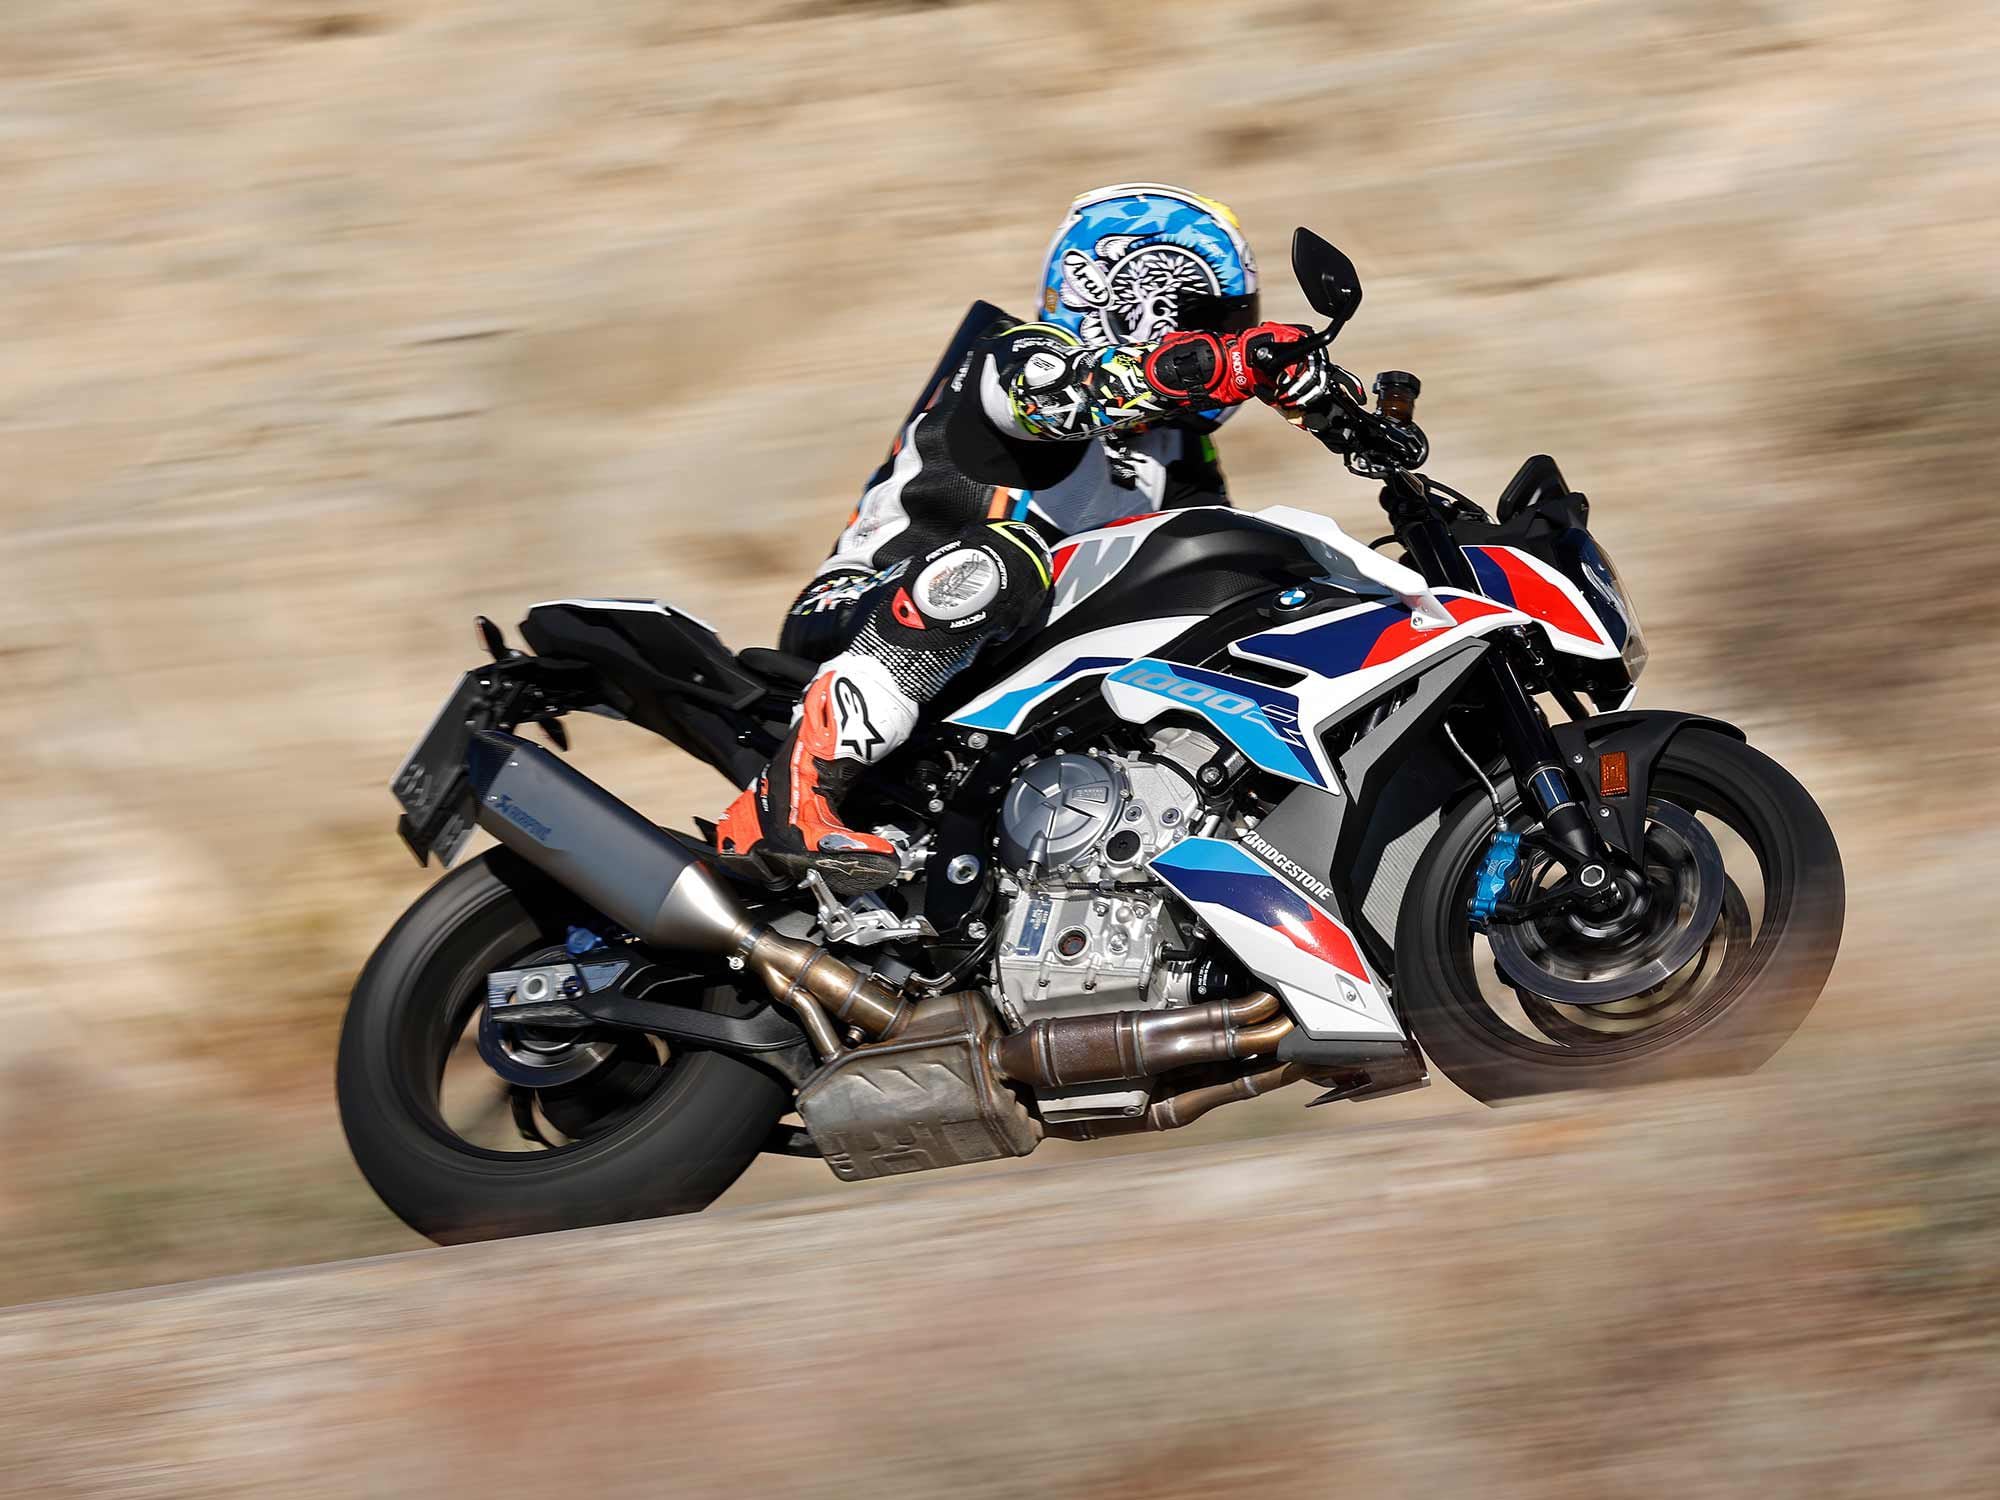 BMW hasn’t detuned or remapped the S 1000 RR motor for the M model.